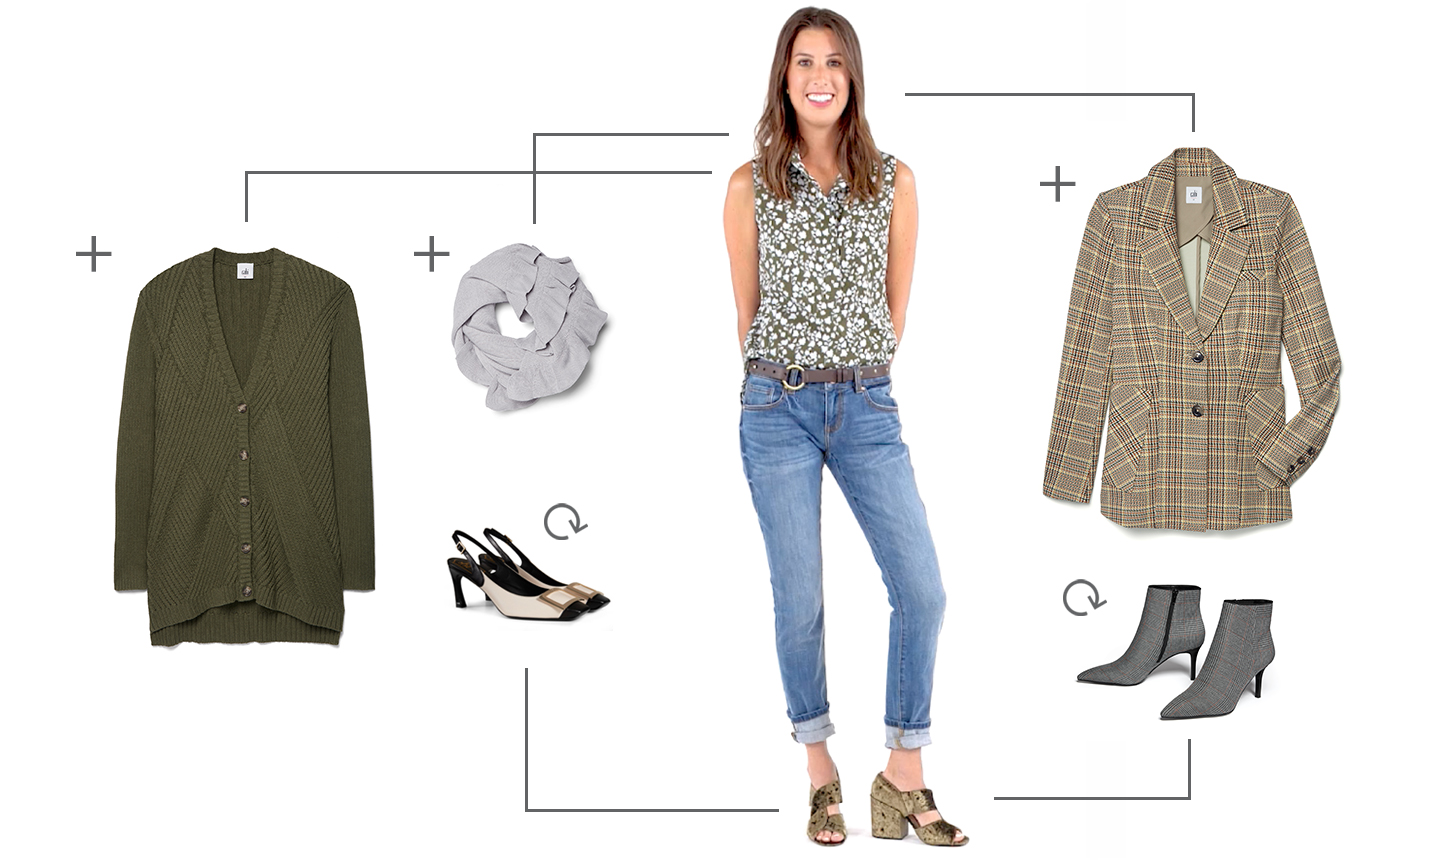 winterize your wardrobe: how to take your fall wardrobe into cold weather